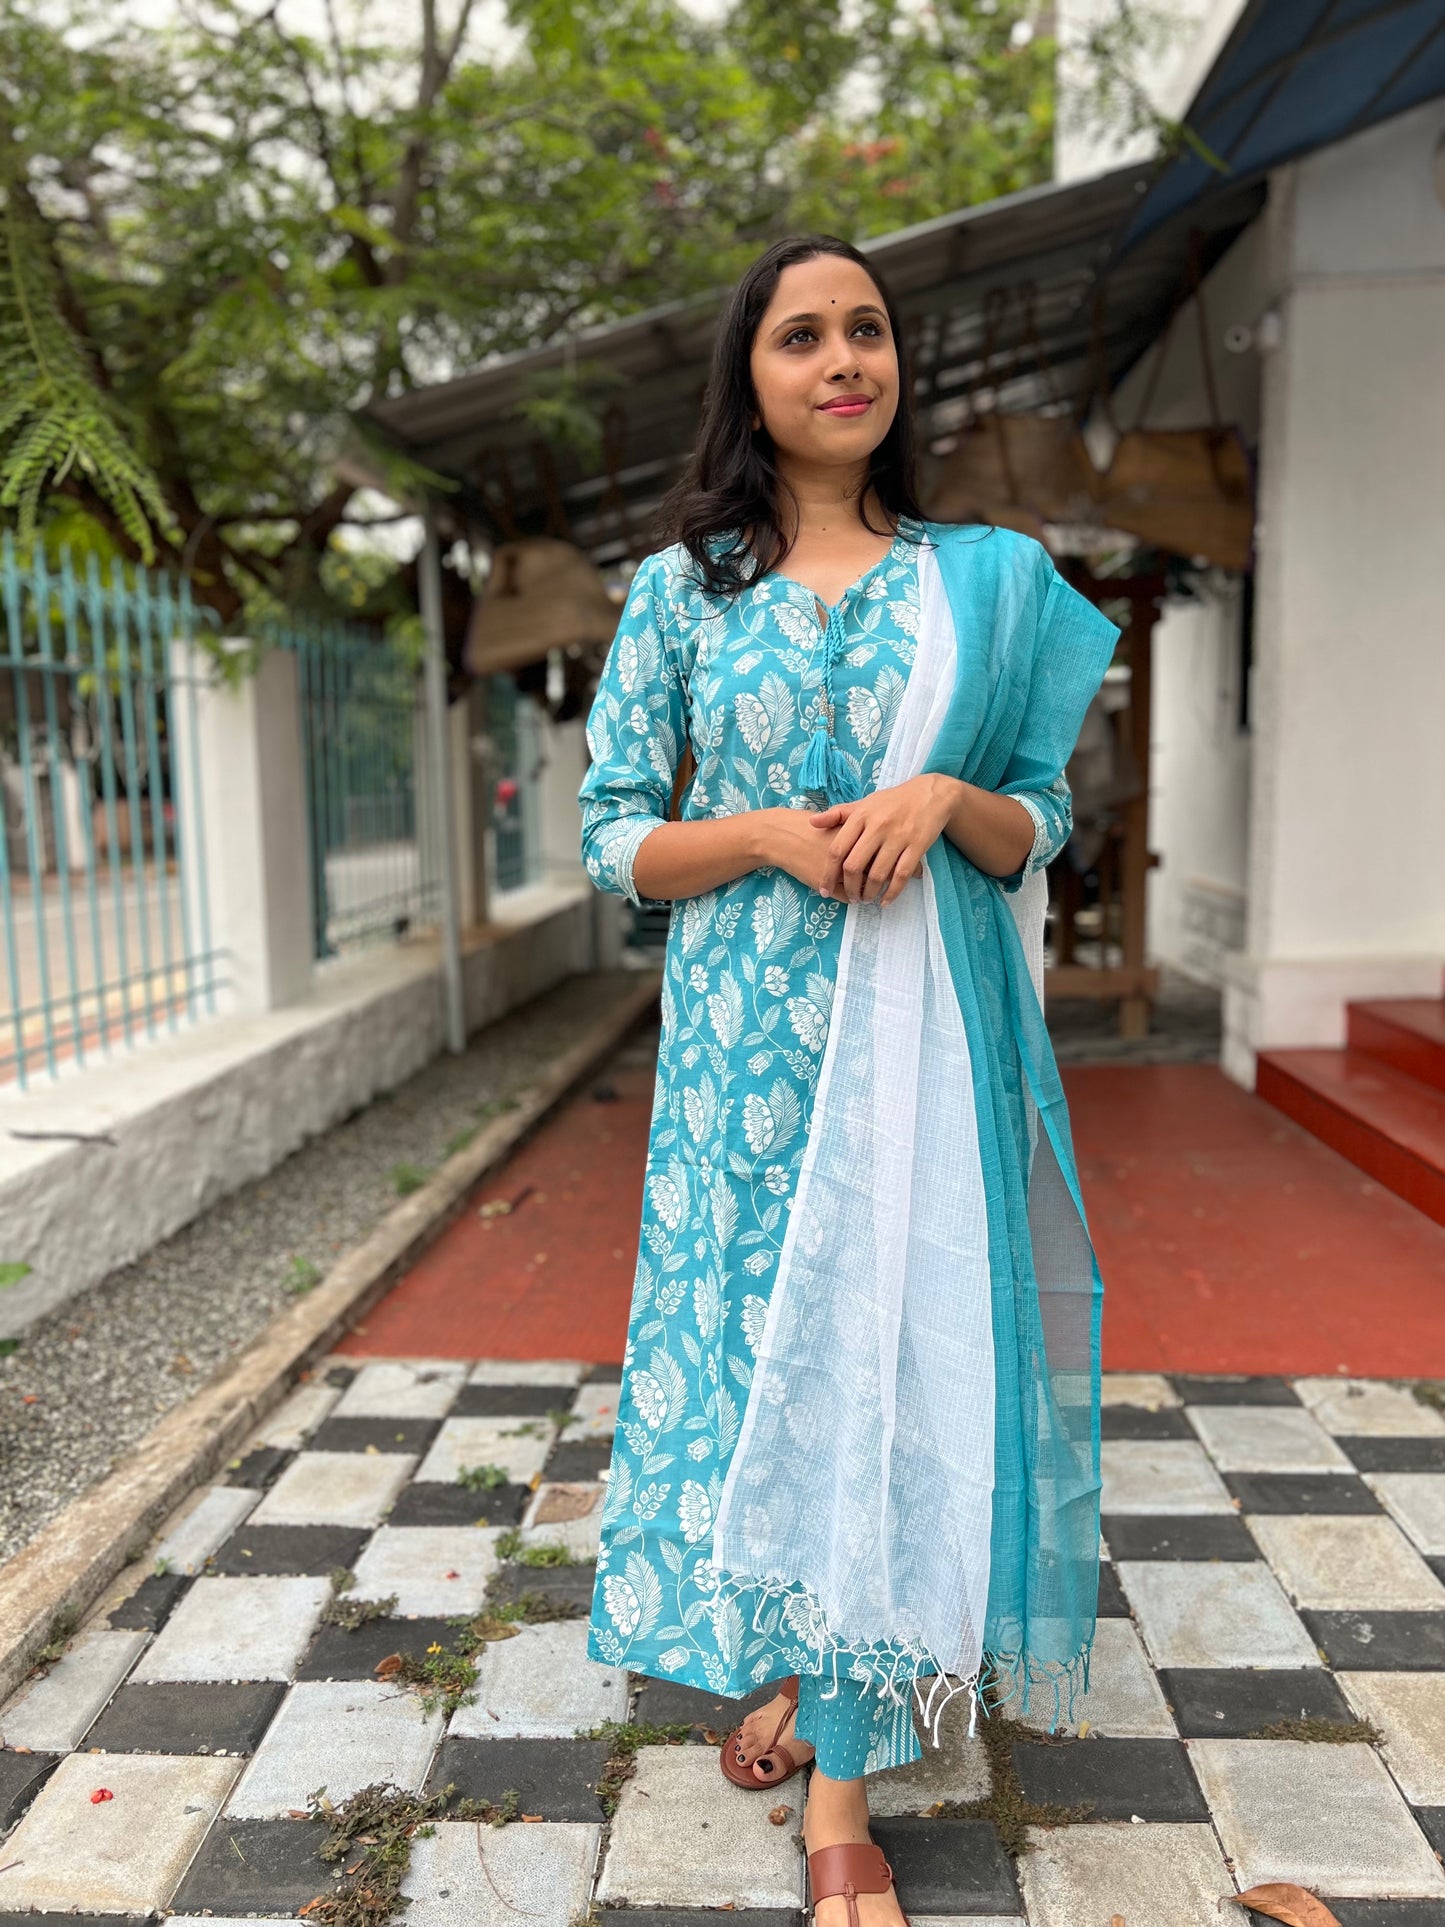 Southloom Stitched Cotton Salwar Set in Blue with Floral Prints